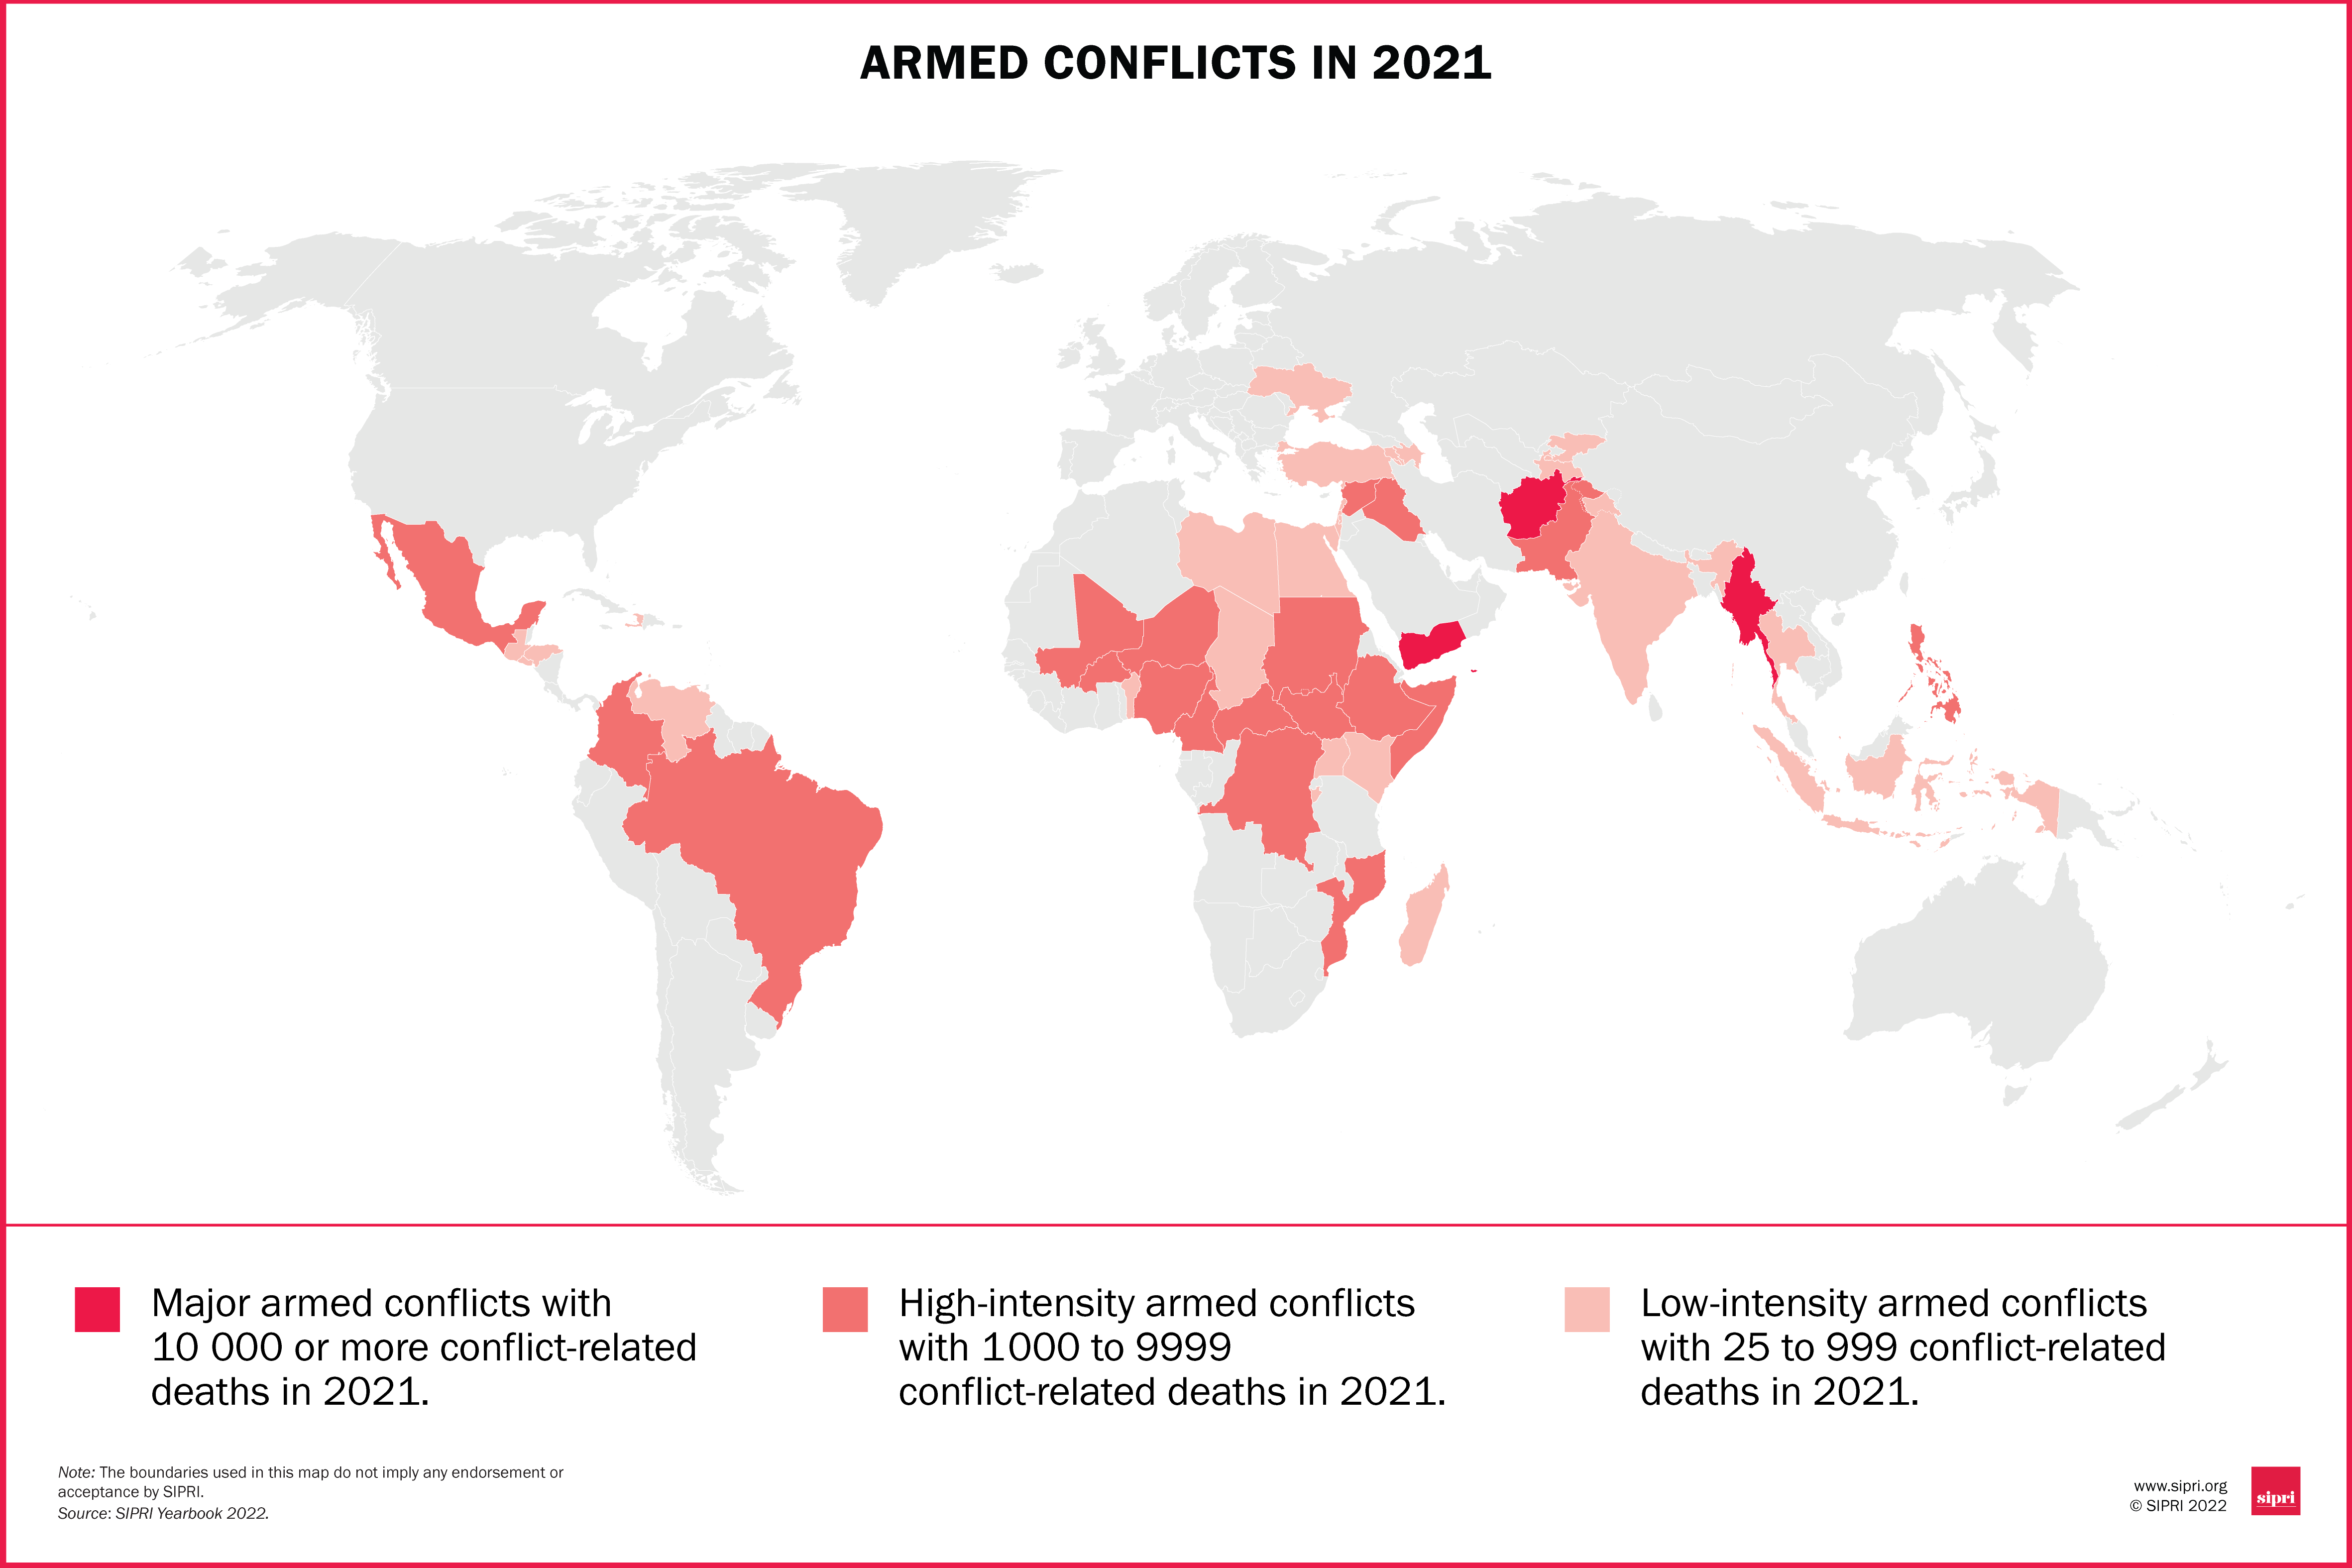 Armed conflicts in 2021